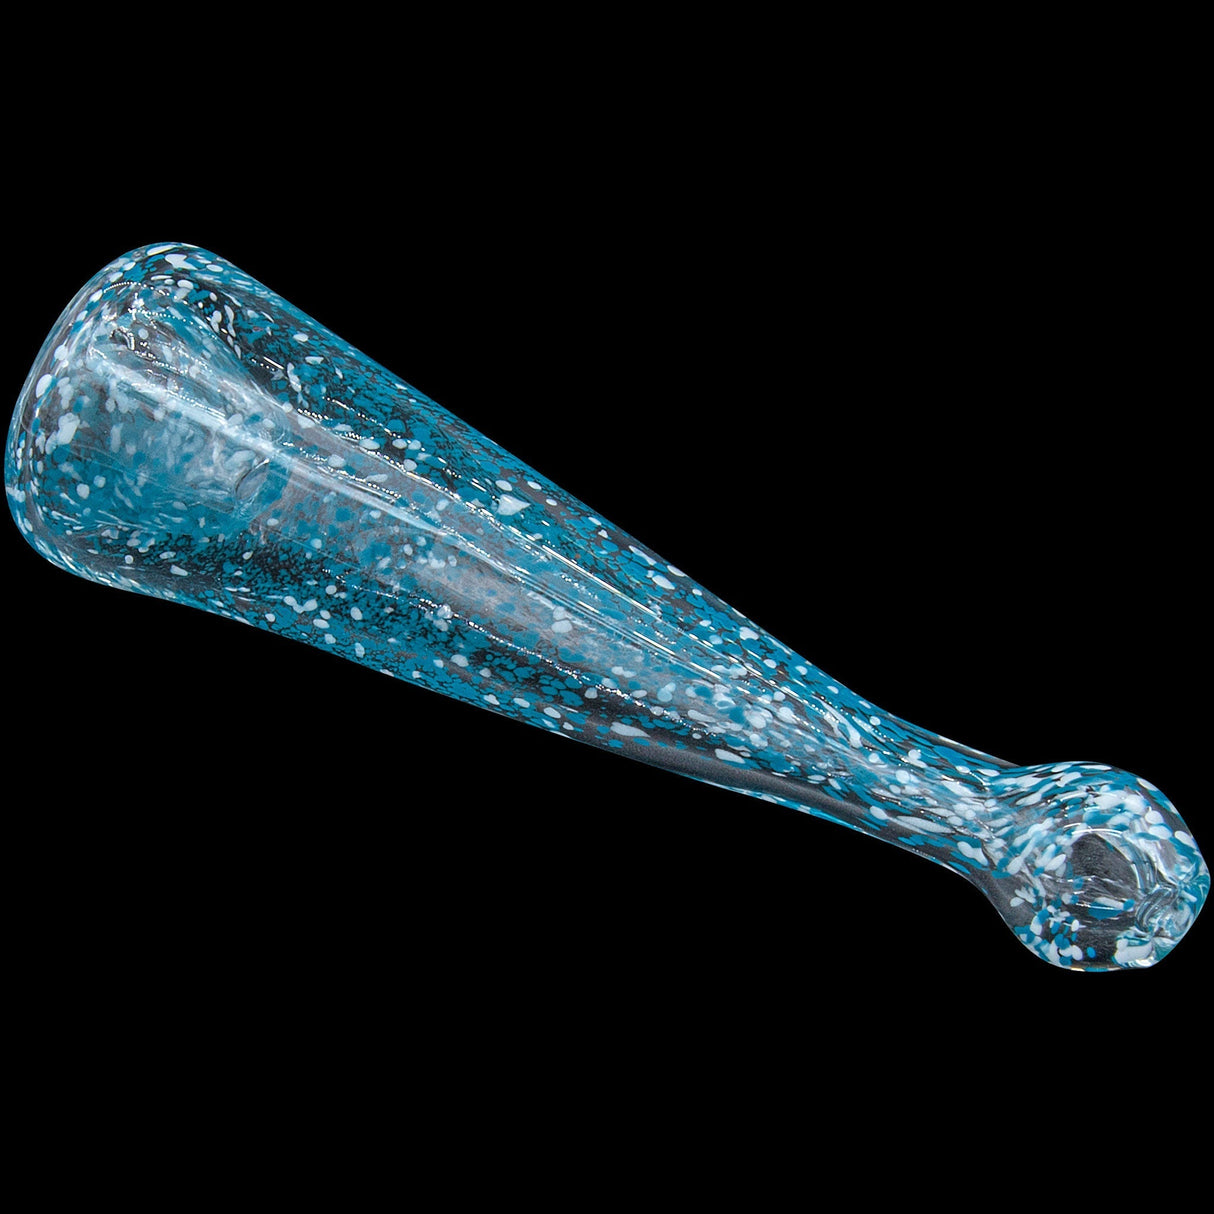 LA Pipes "Magic Dust" Frit Chillum - 4.5" Fumed Color Changing Glass Pipe for Dry Herbs, USA Made